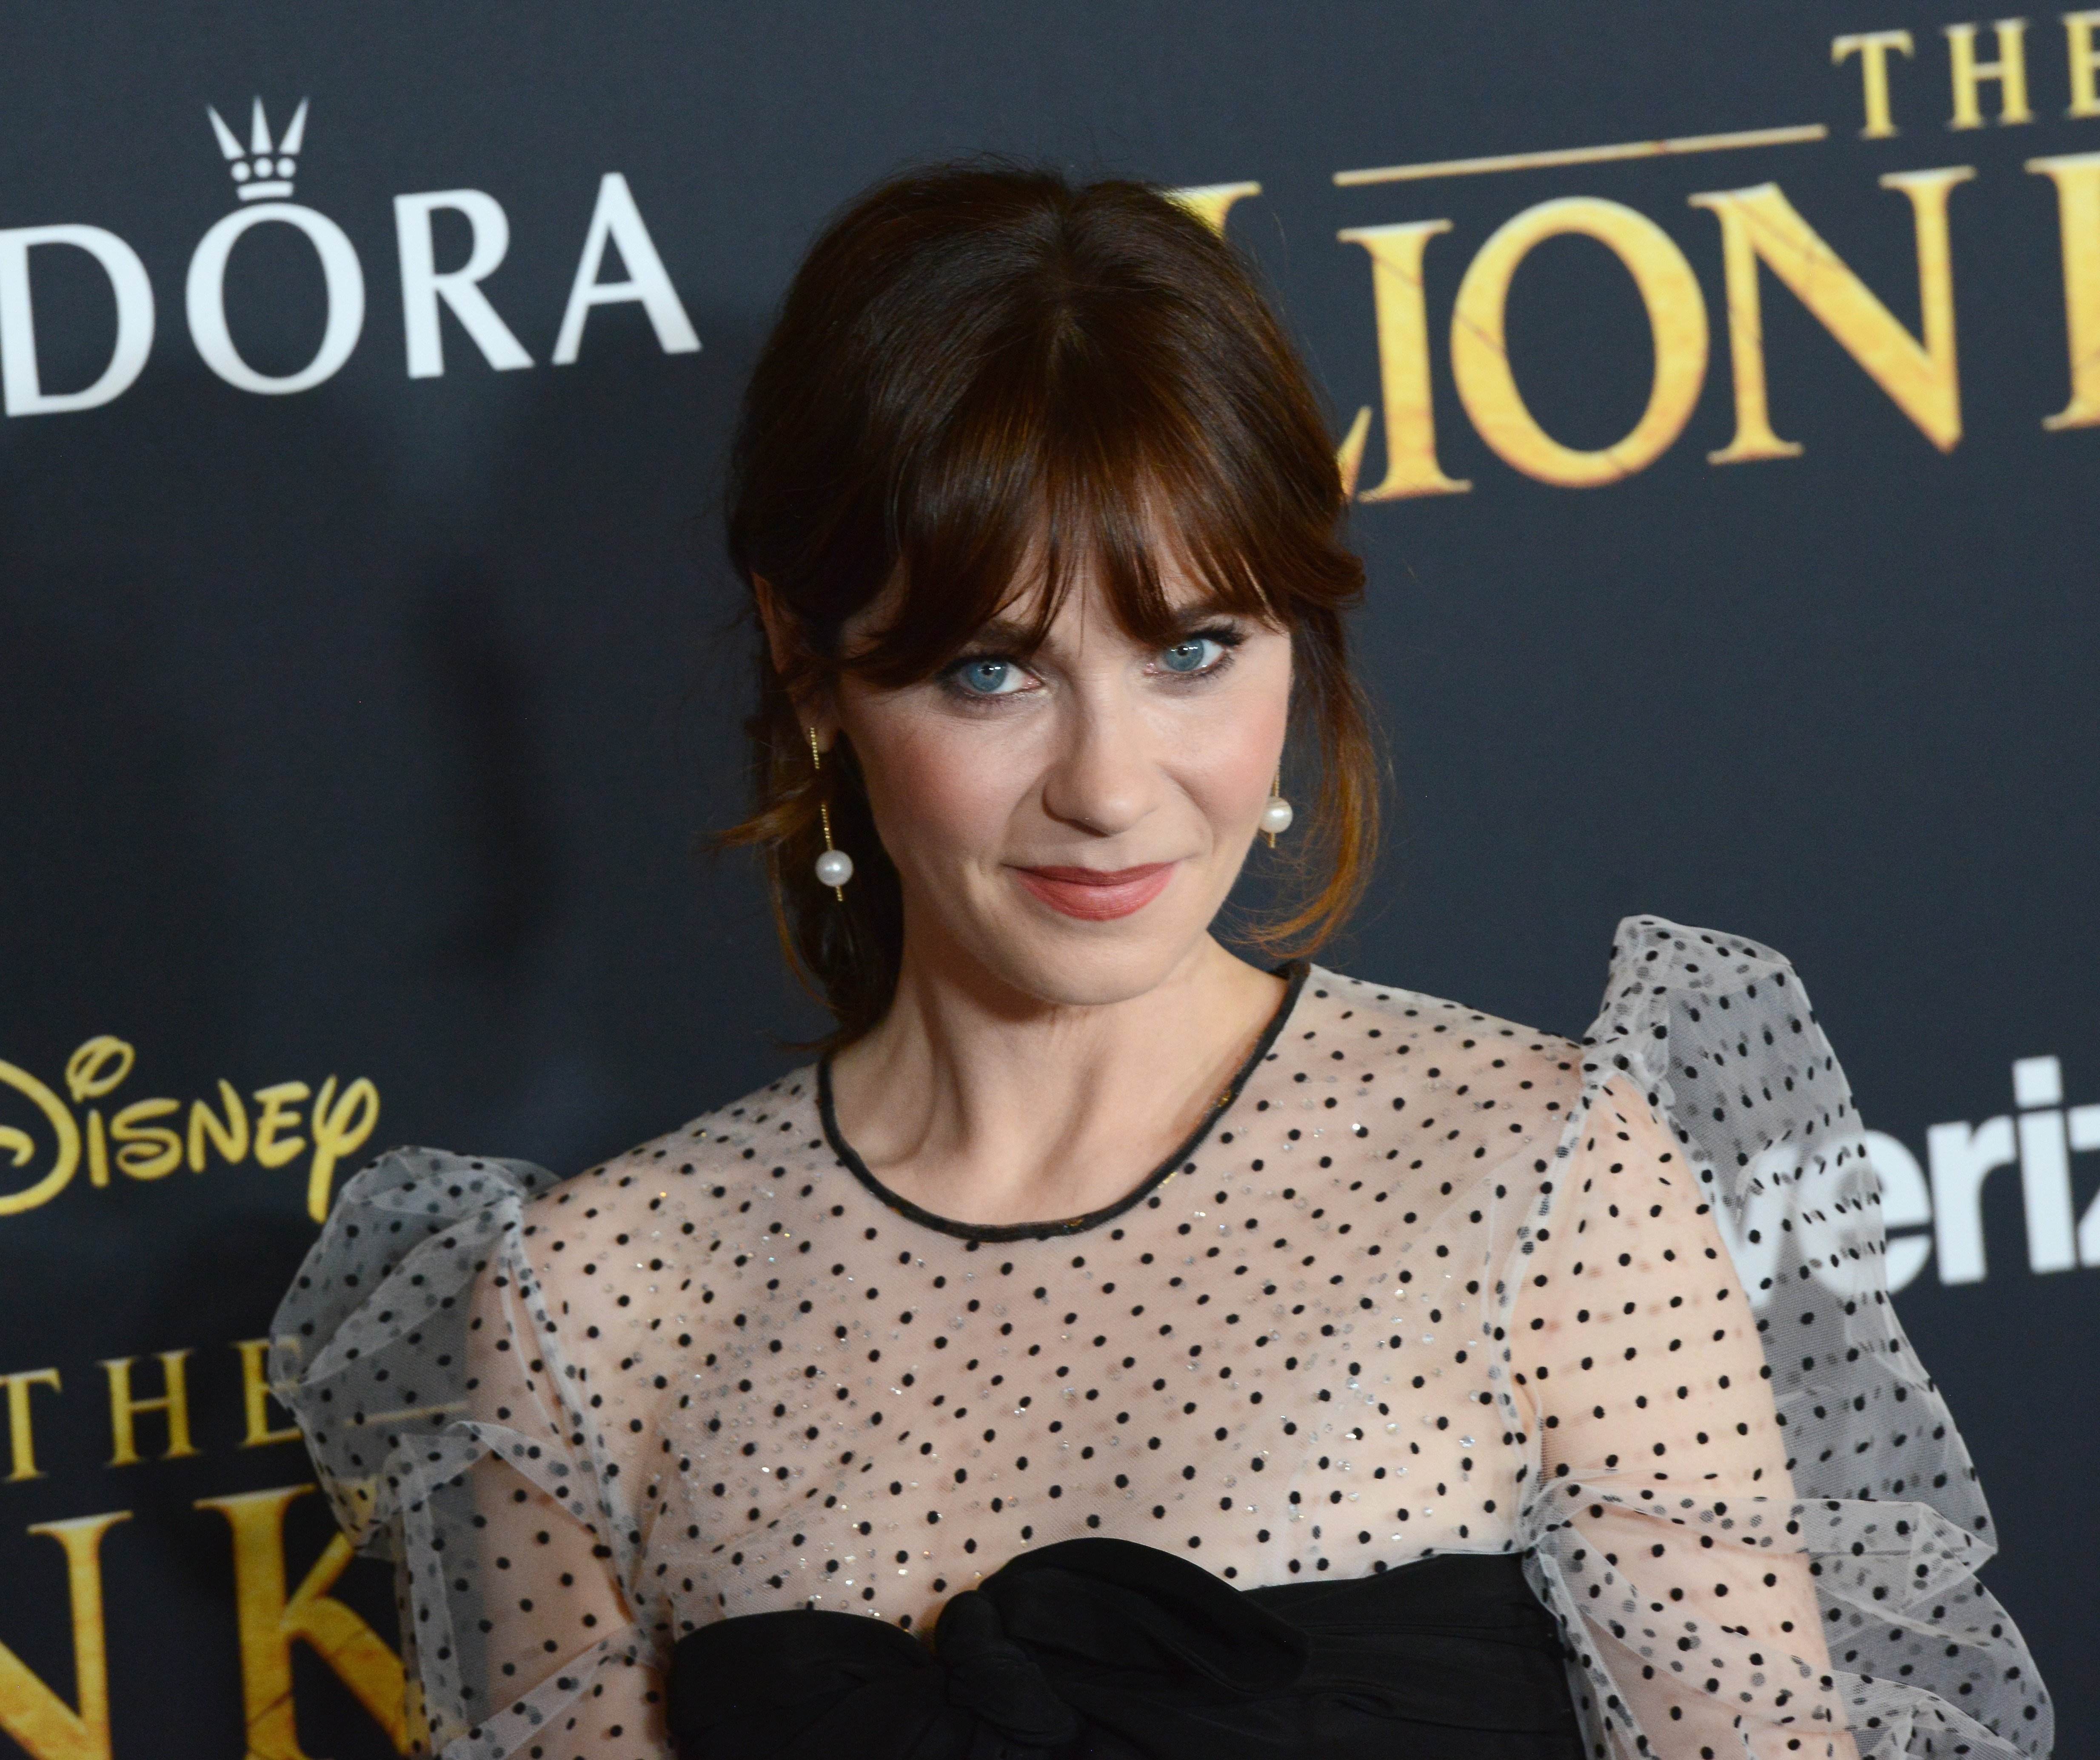 Zooey Deschanel attends "The Lion King" premiere at Dolby Theatre on July 9, 2019, in Hollywood, California. | Photo: Getty Images